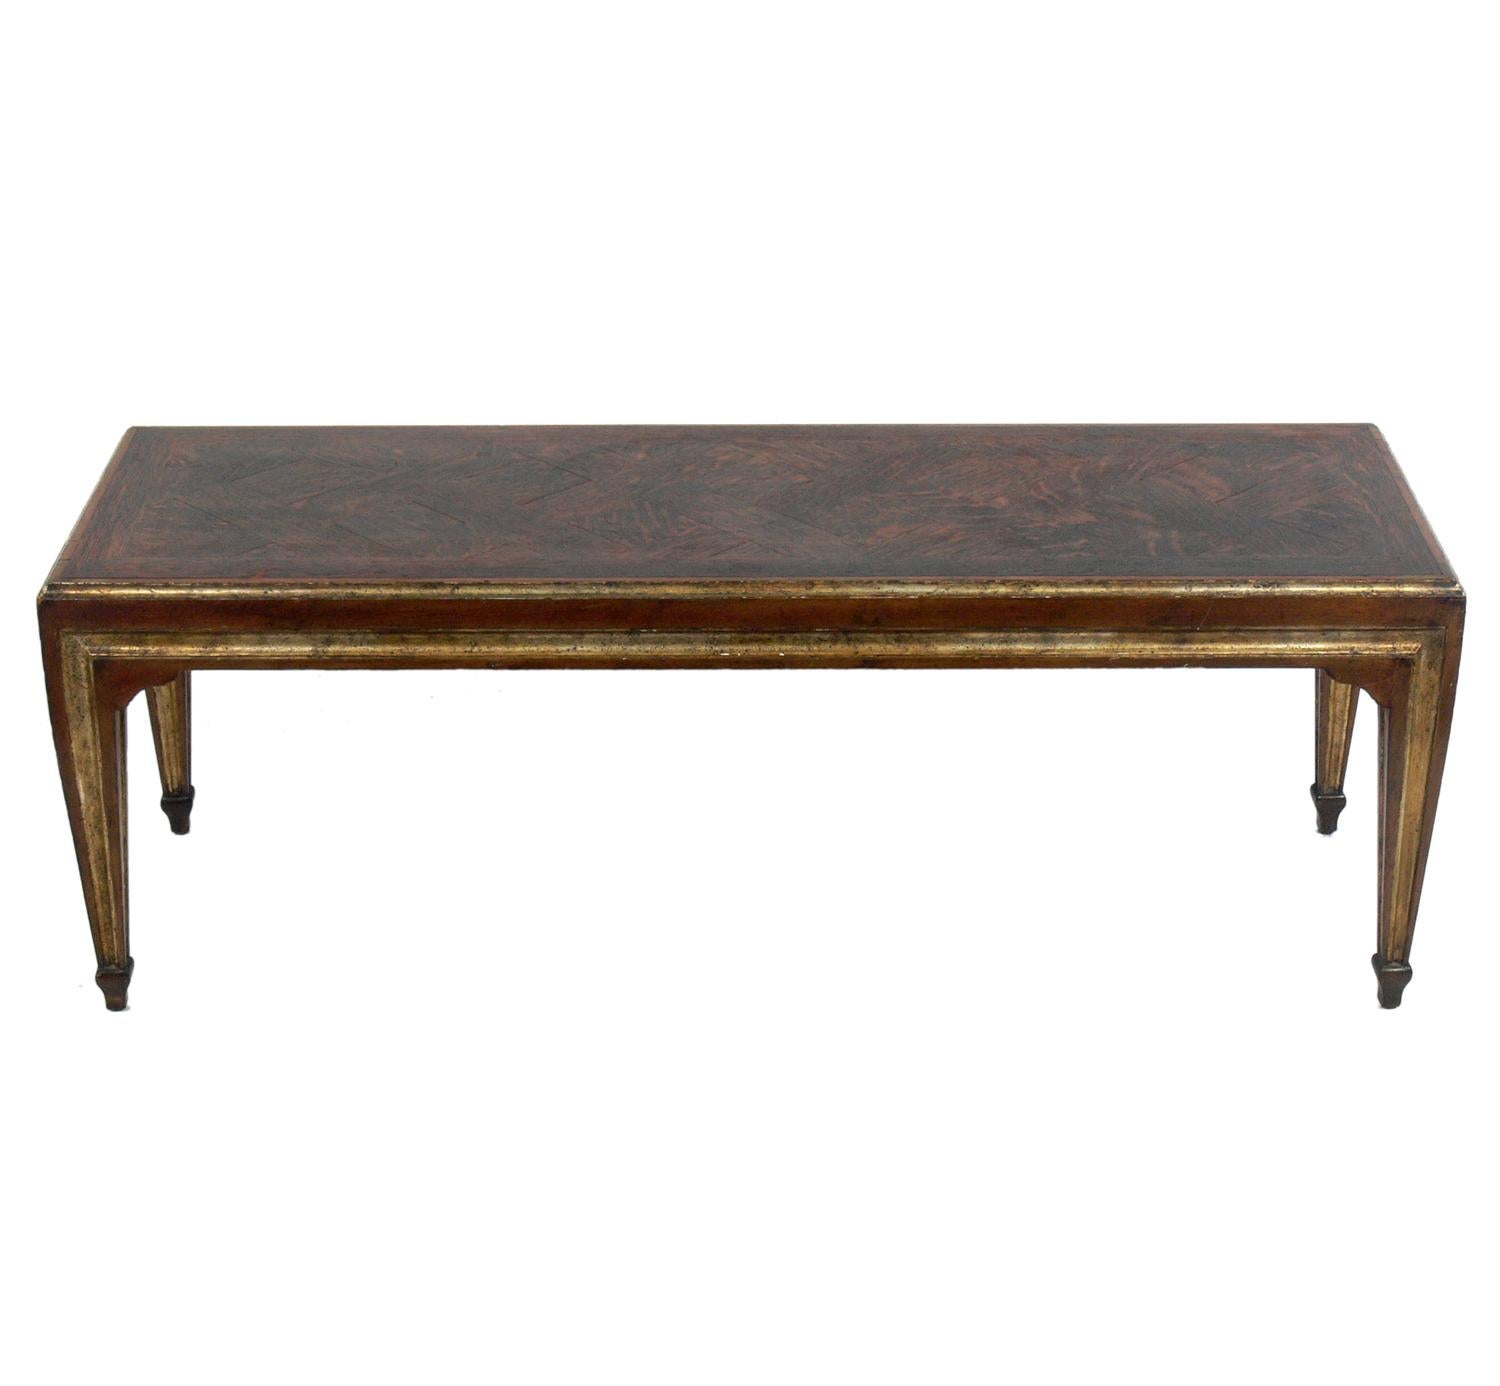 French coffee table in oak parquet and silver leaf, France, circa 1940s, possibly earlier. It is a versatile size and can be used as a coffee table or bench.